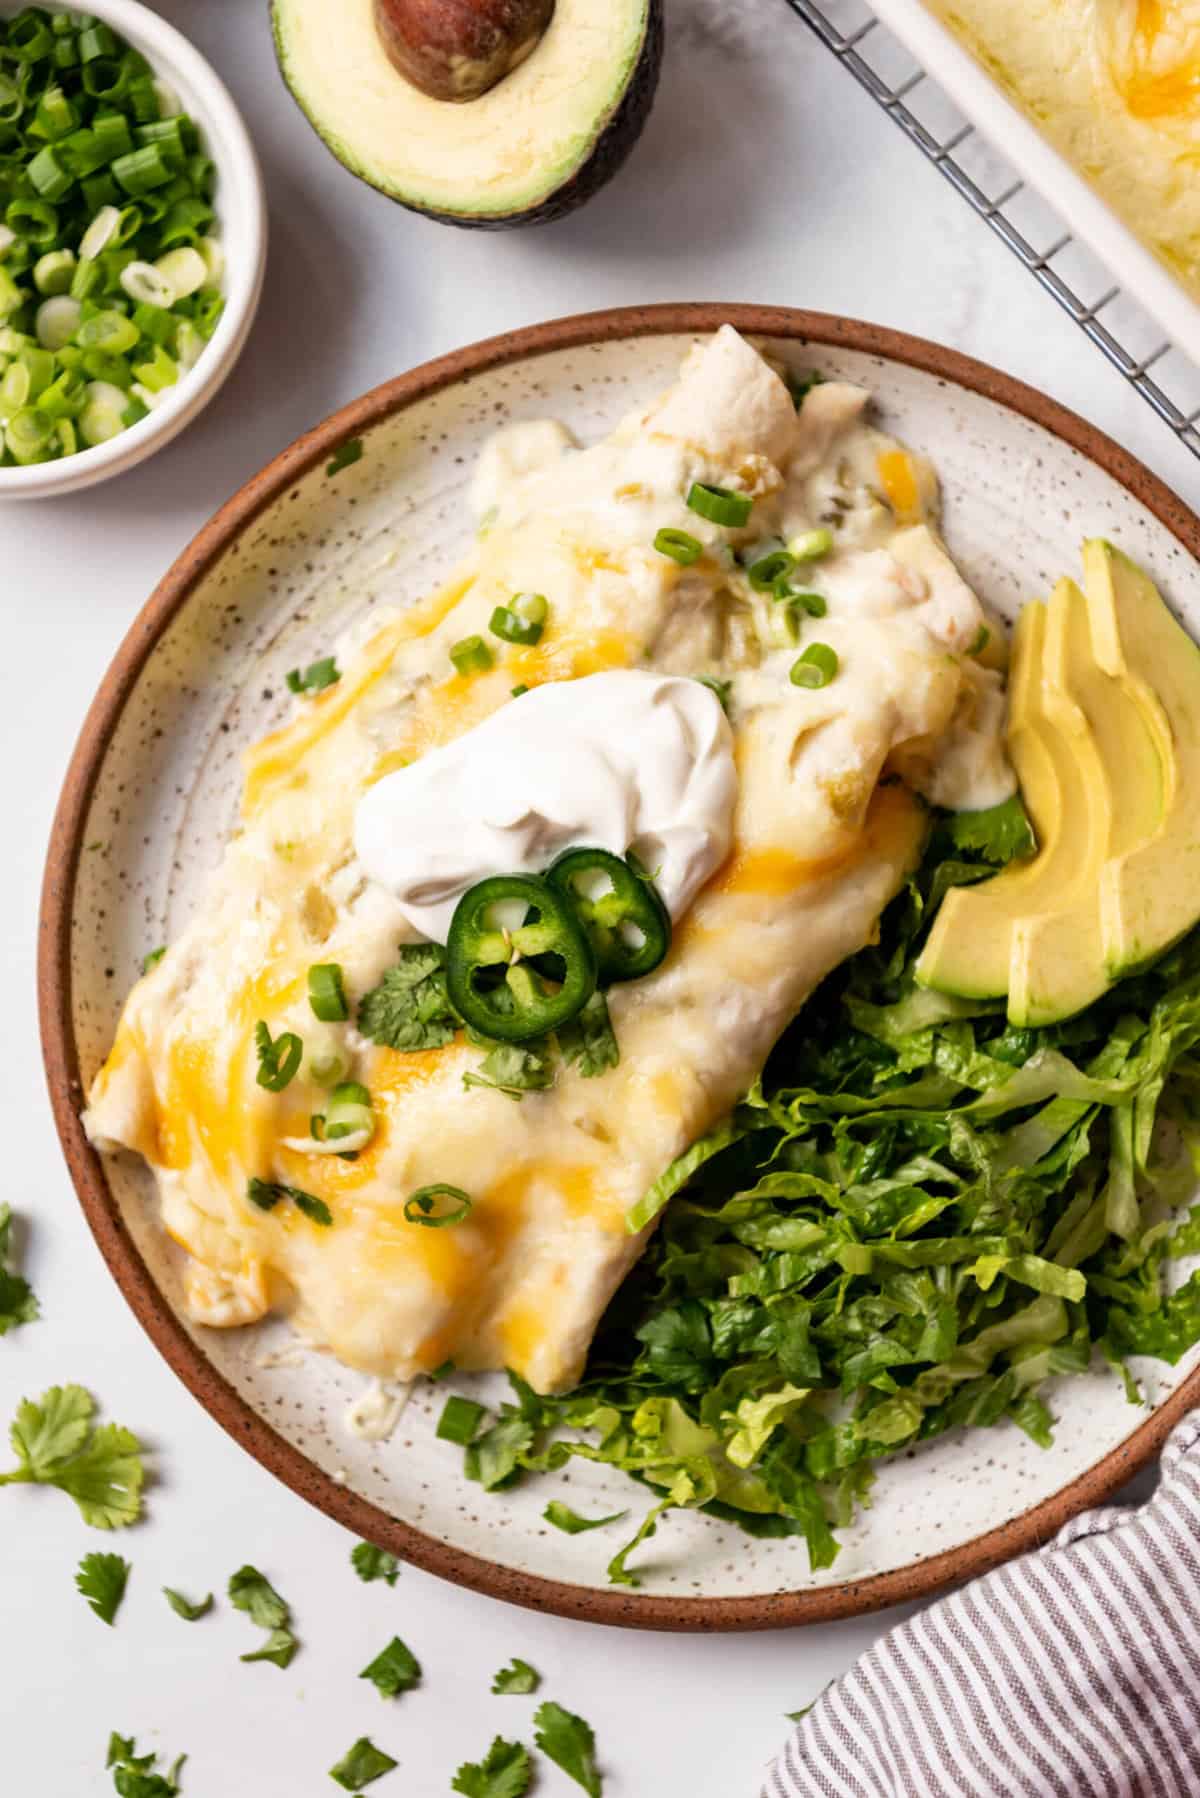 An overhead image of a plate of sour cream chicken enchiladas with lettuce and avocado on the side.